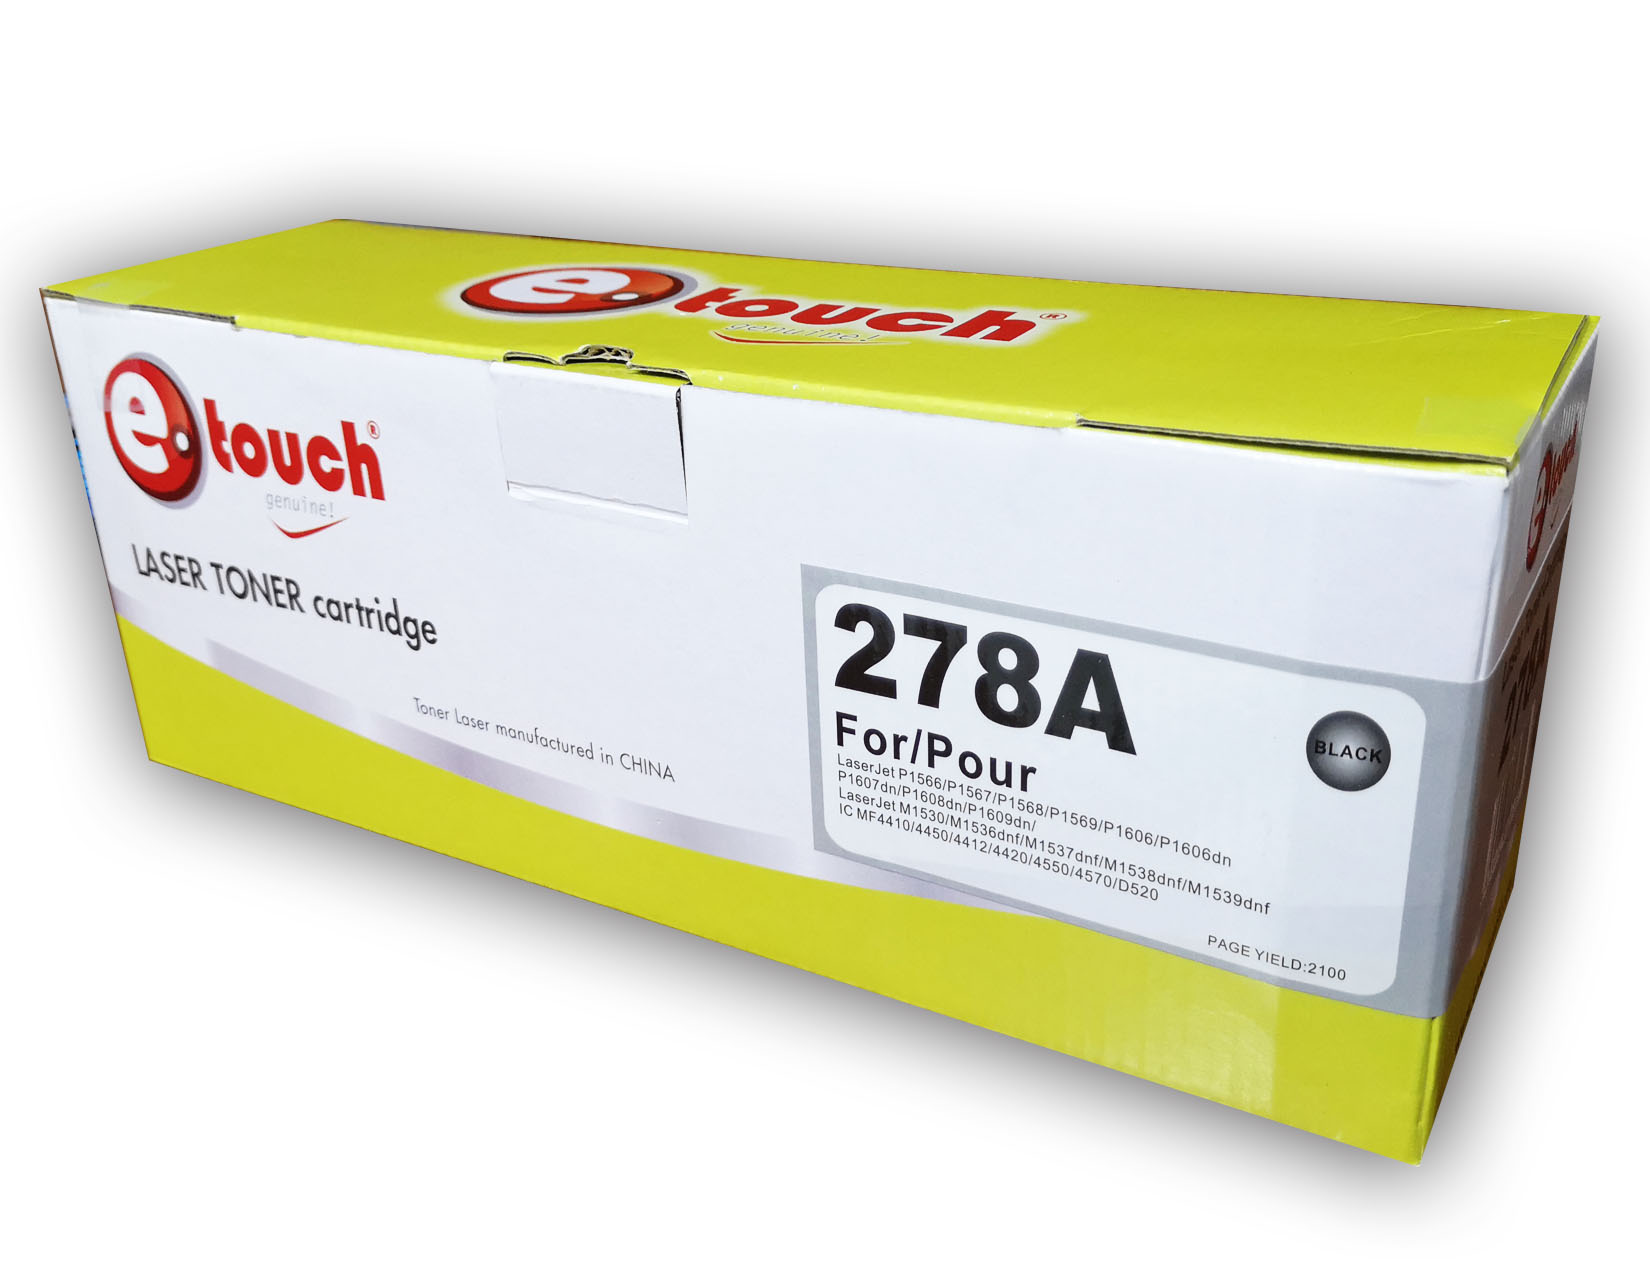 TONER ETOUCH HP 278A 1566 1606 